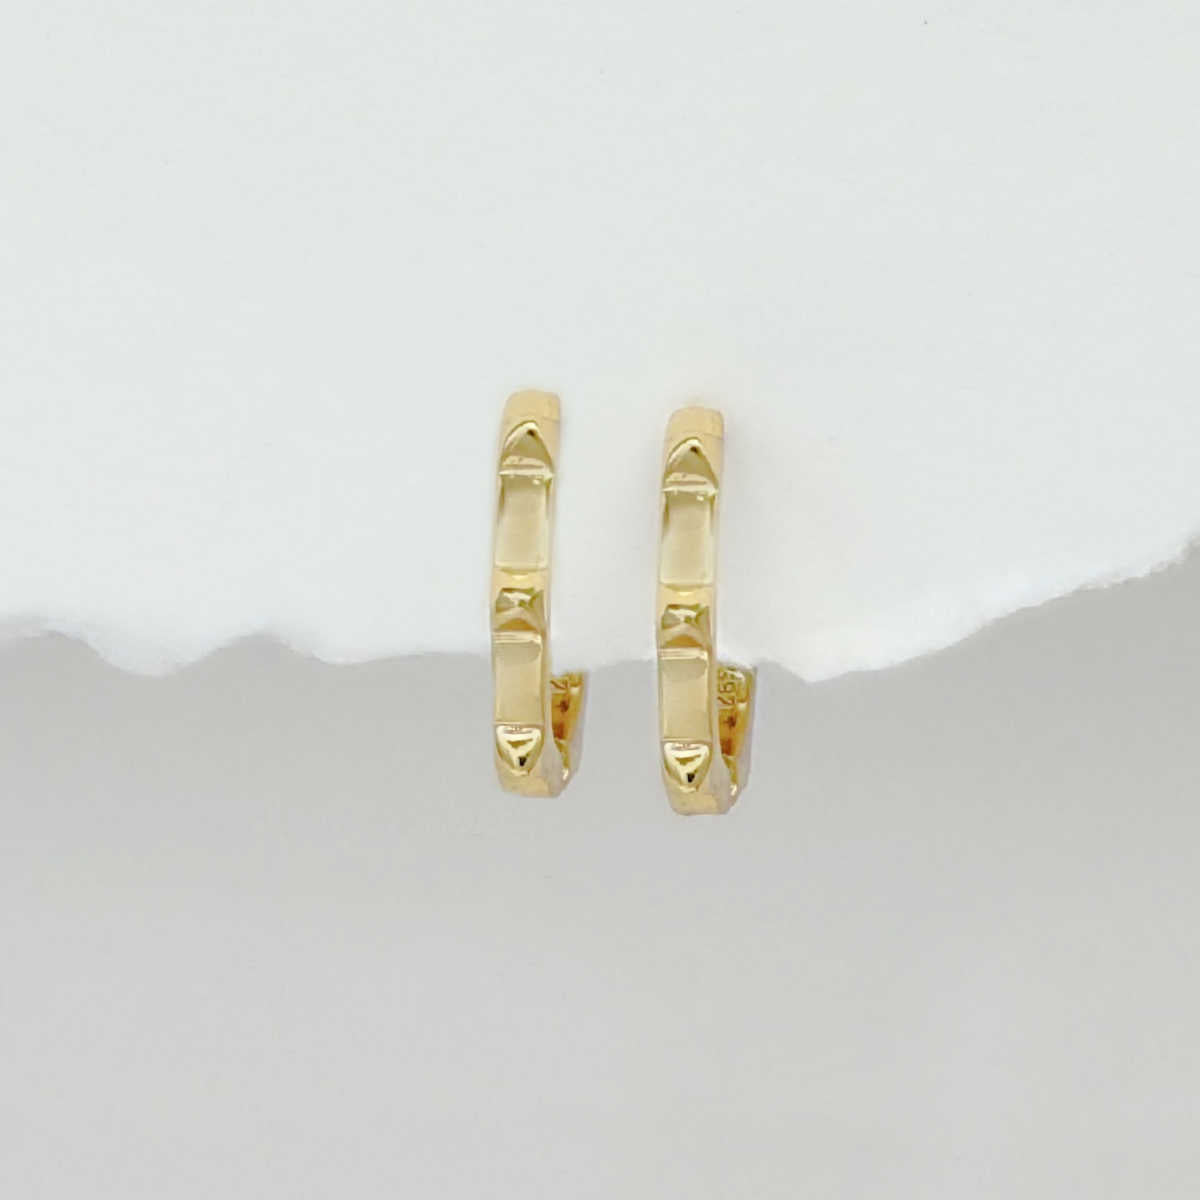 Gold Hoop Earrings with Spikes